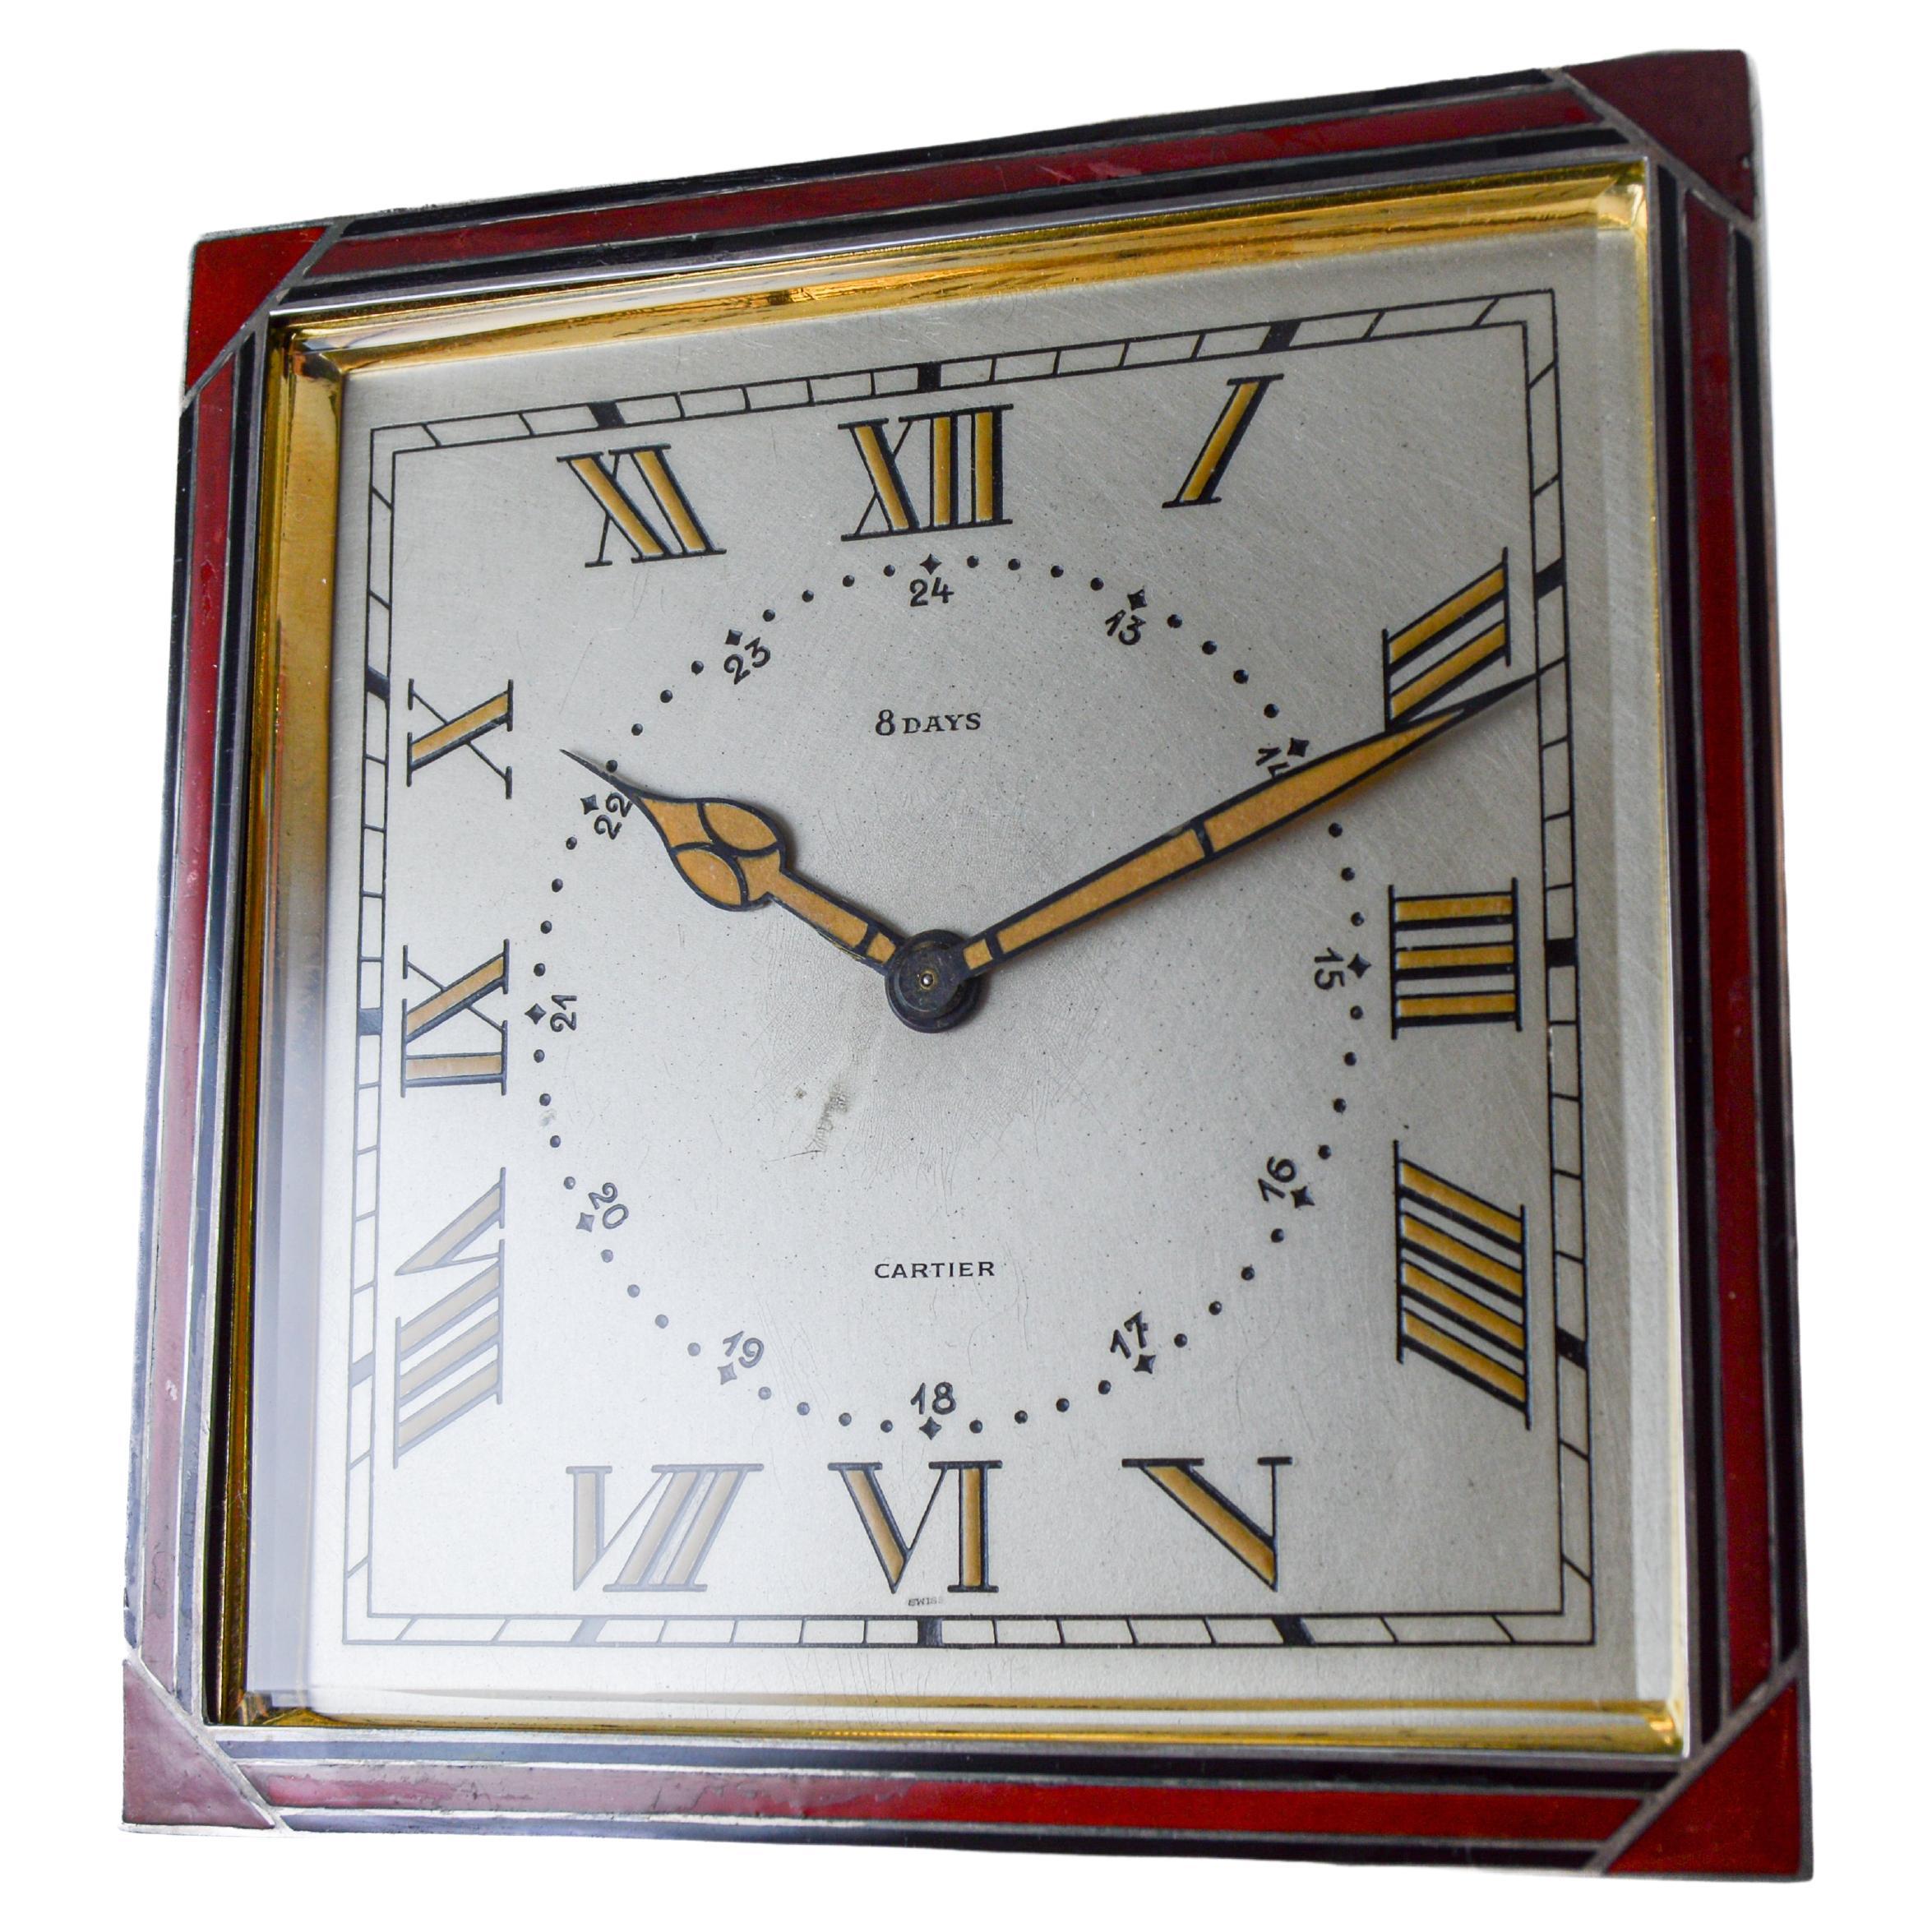 Cartier Sterling and Enamel Art Deco Desk Clock with Breguet Engine Turned Dial For Sale 3